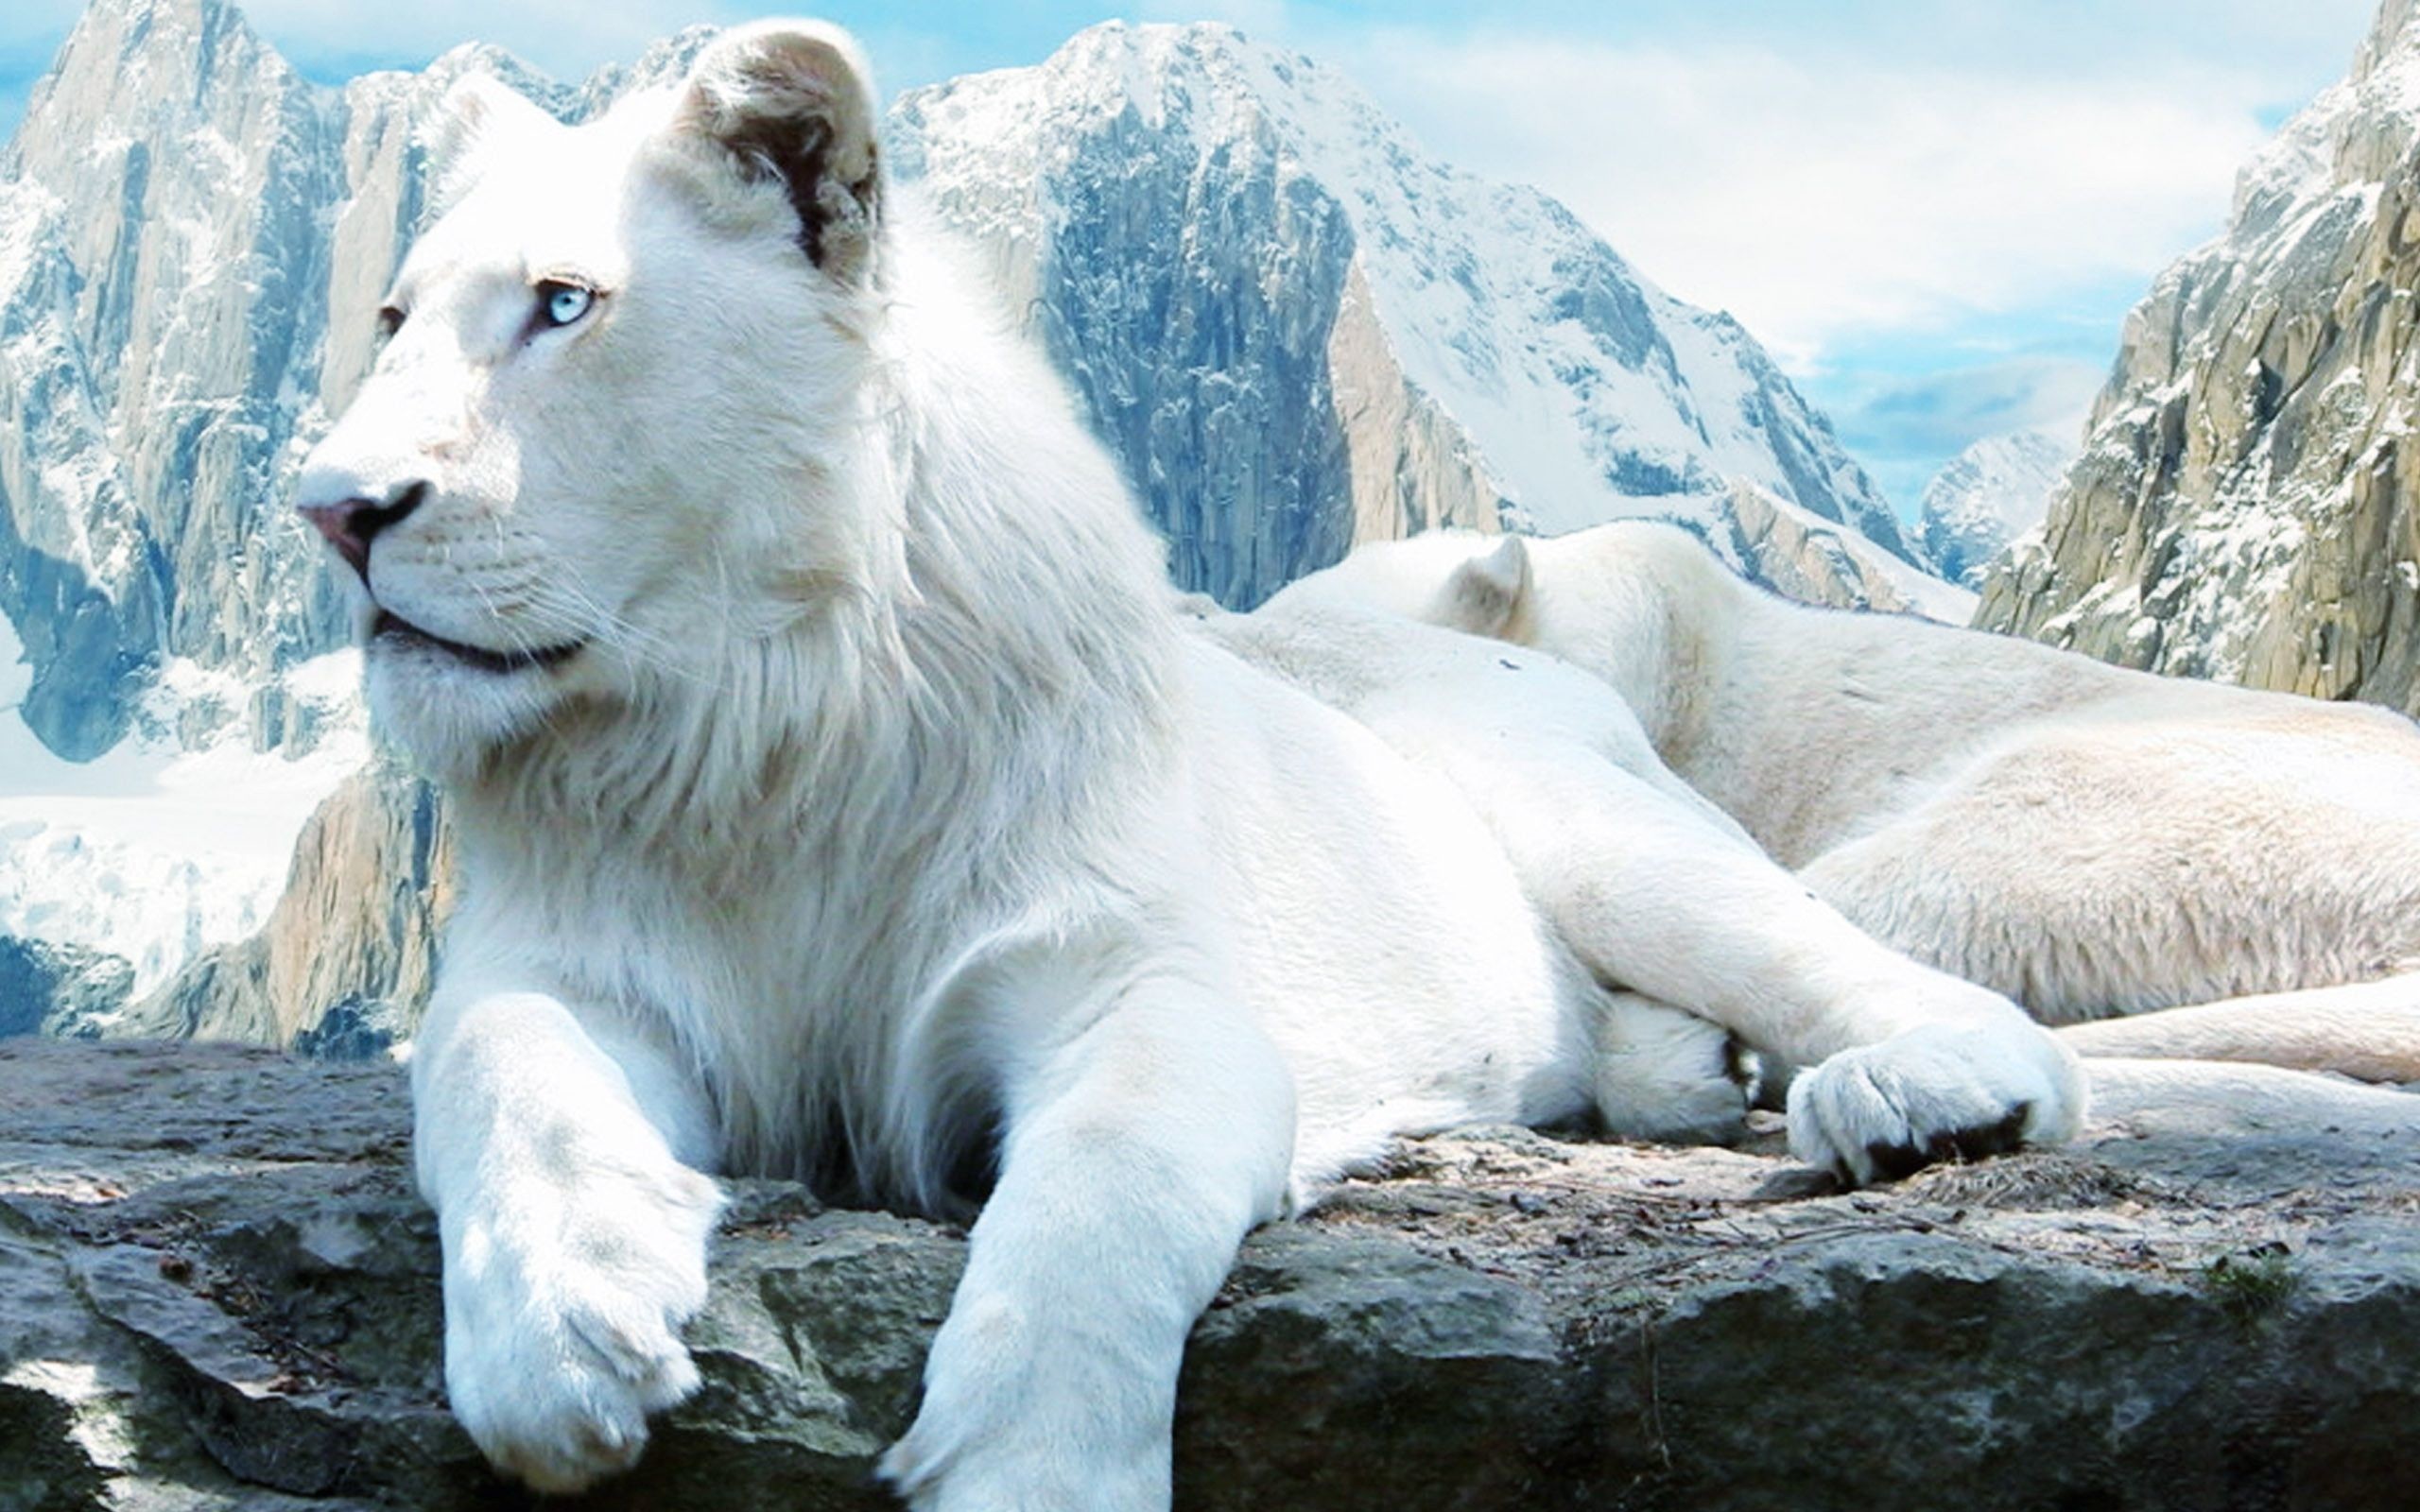 African White Lion Wallpaper 63 Images